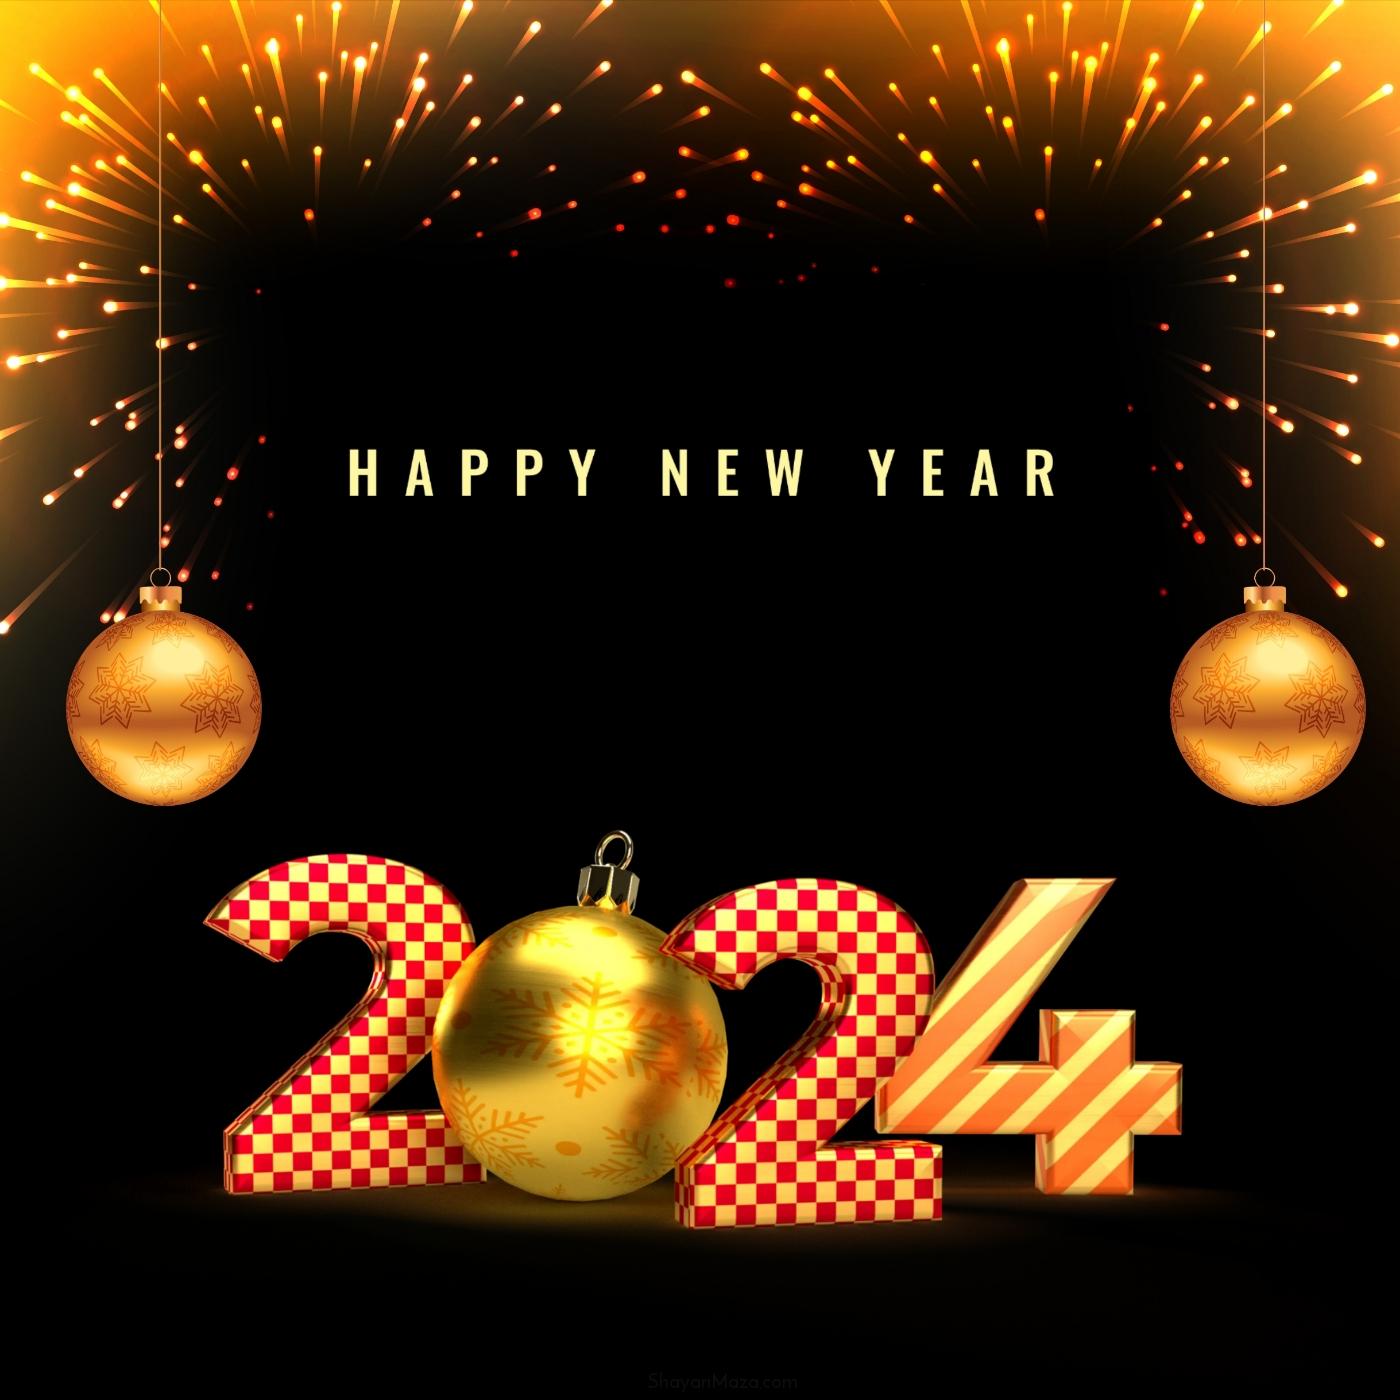 Free Happy New Year Images HD Download